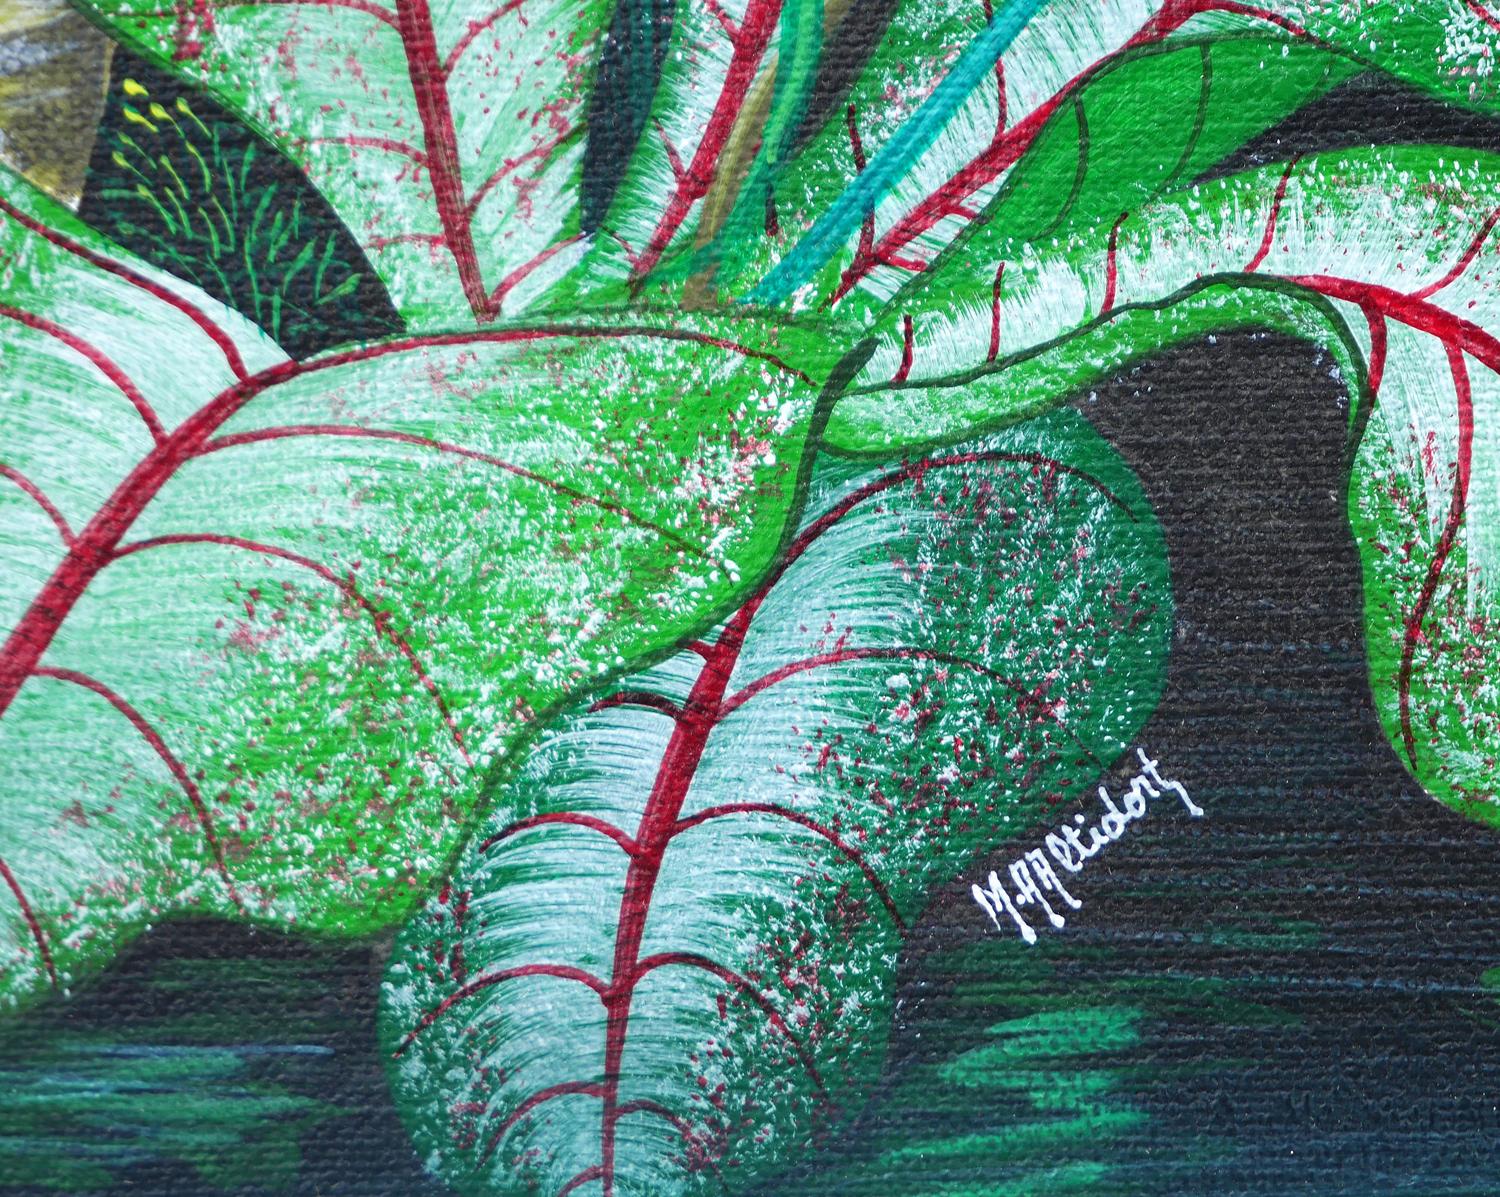 Colorful Tropical Jungle Landscape with Central Nude Female Figure 6